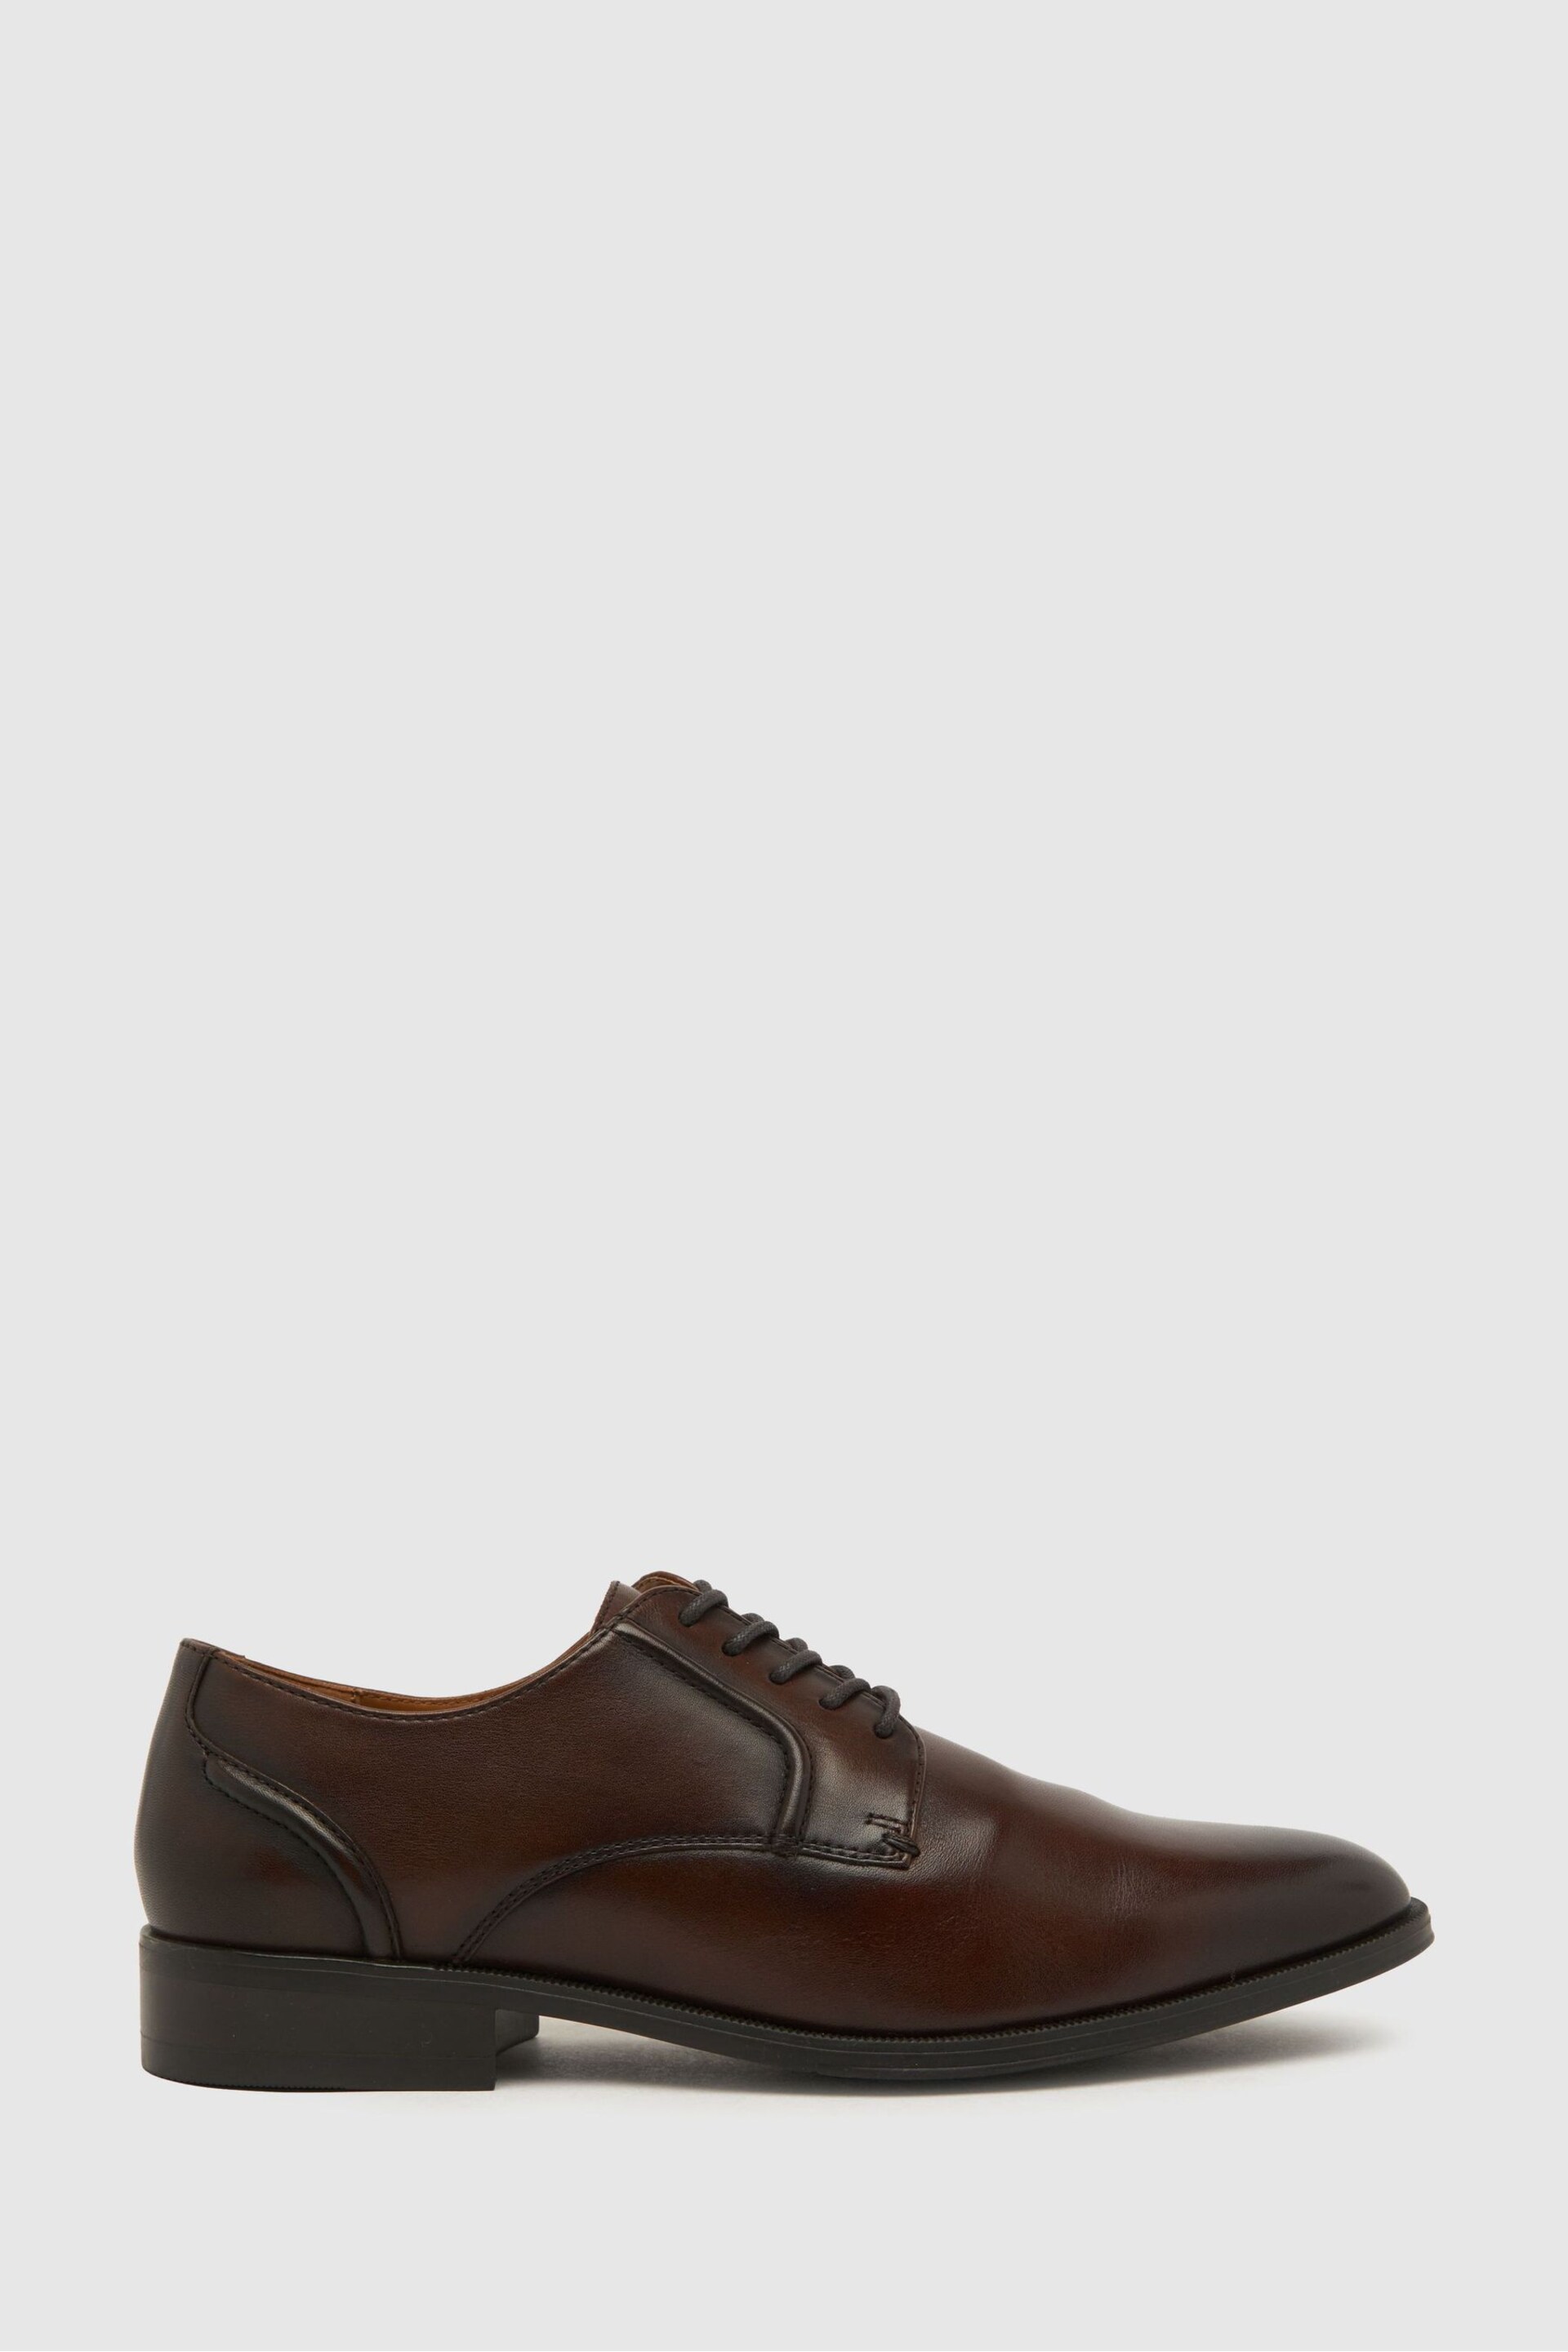 Schuh Reilly Leather Lace-Up Shoes - Image 1 of 4